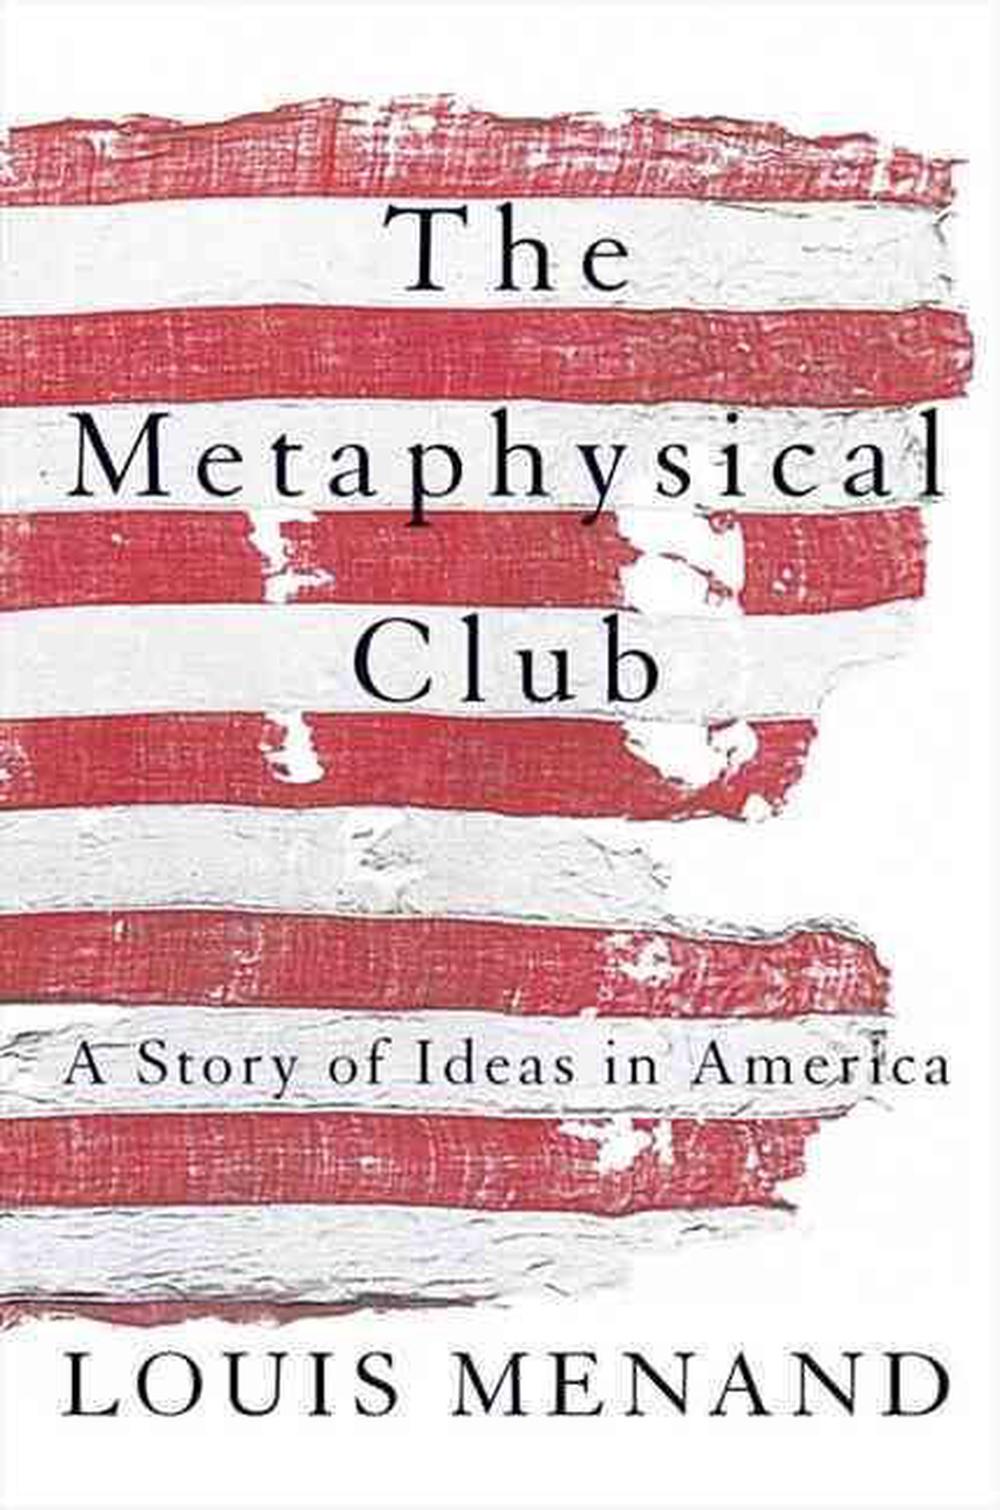 The Metaphysical Club: A Story of Ideas in America by Louis Menand Paperback Boo 9780007126903 ...